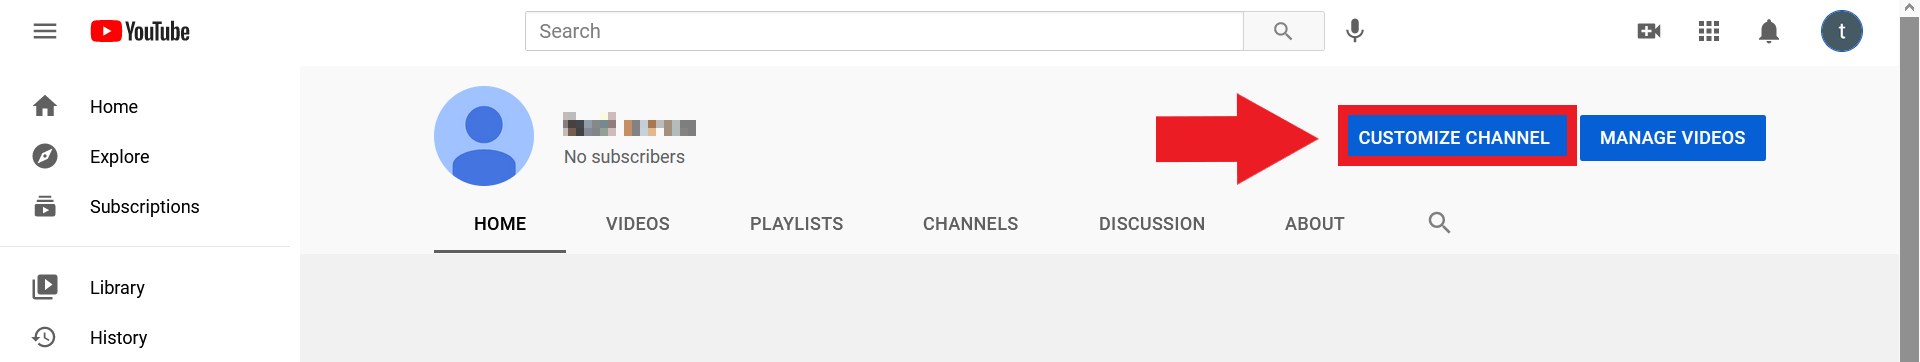 “Customize Channel” button in YouTube channel menu